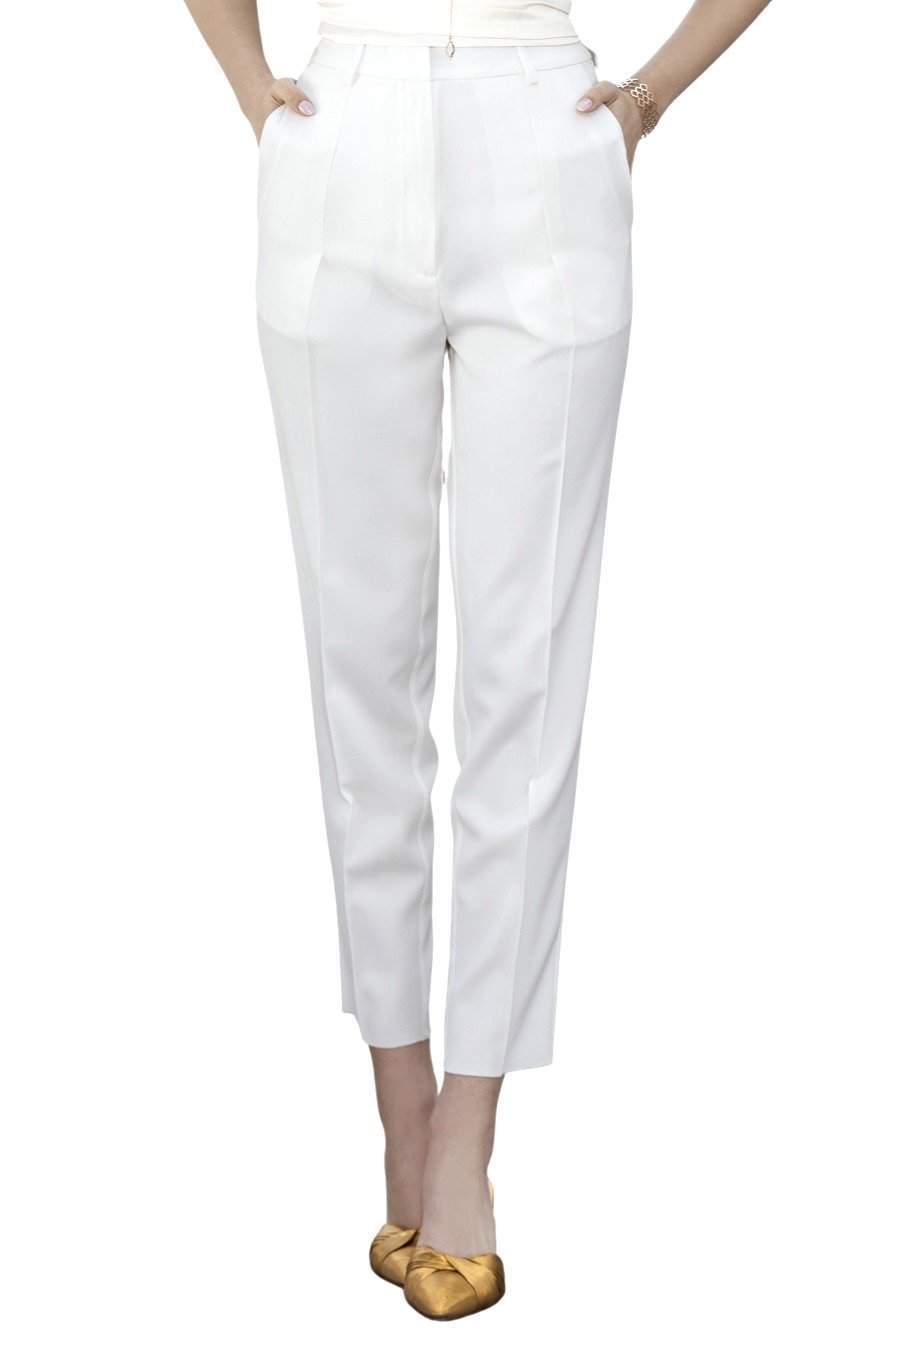 White Classic Office Pants-danddclothing-AFRICAN WEAR FOR WOMEN,Female trousers,Trousers,white